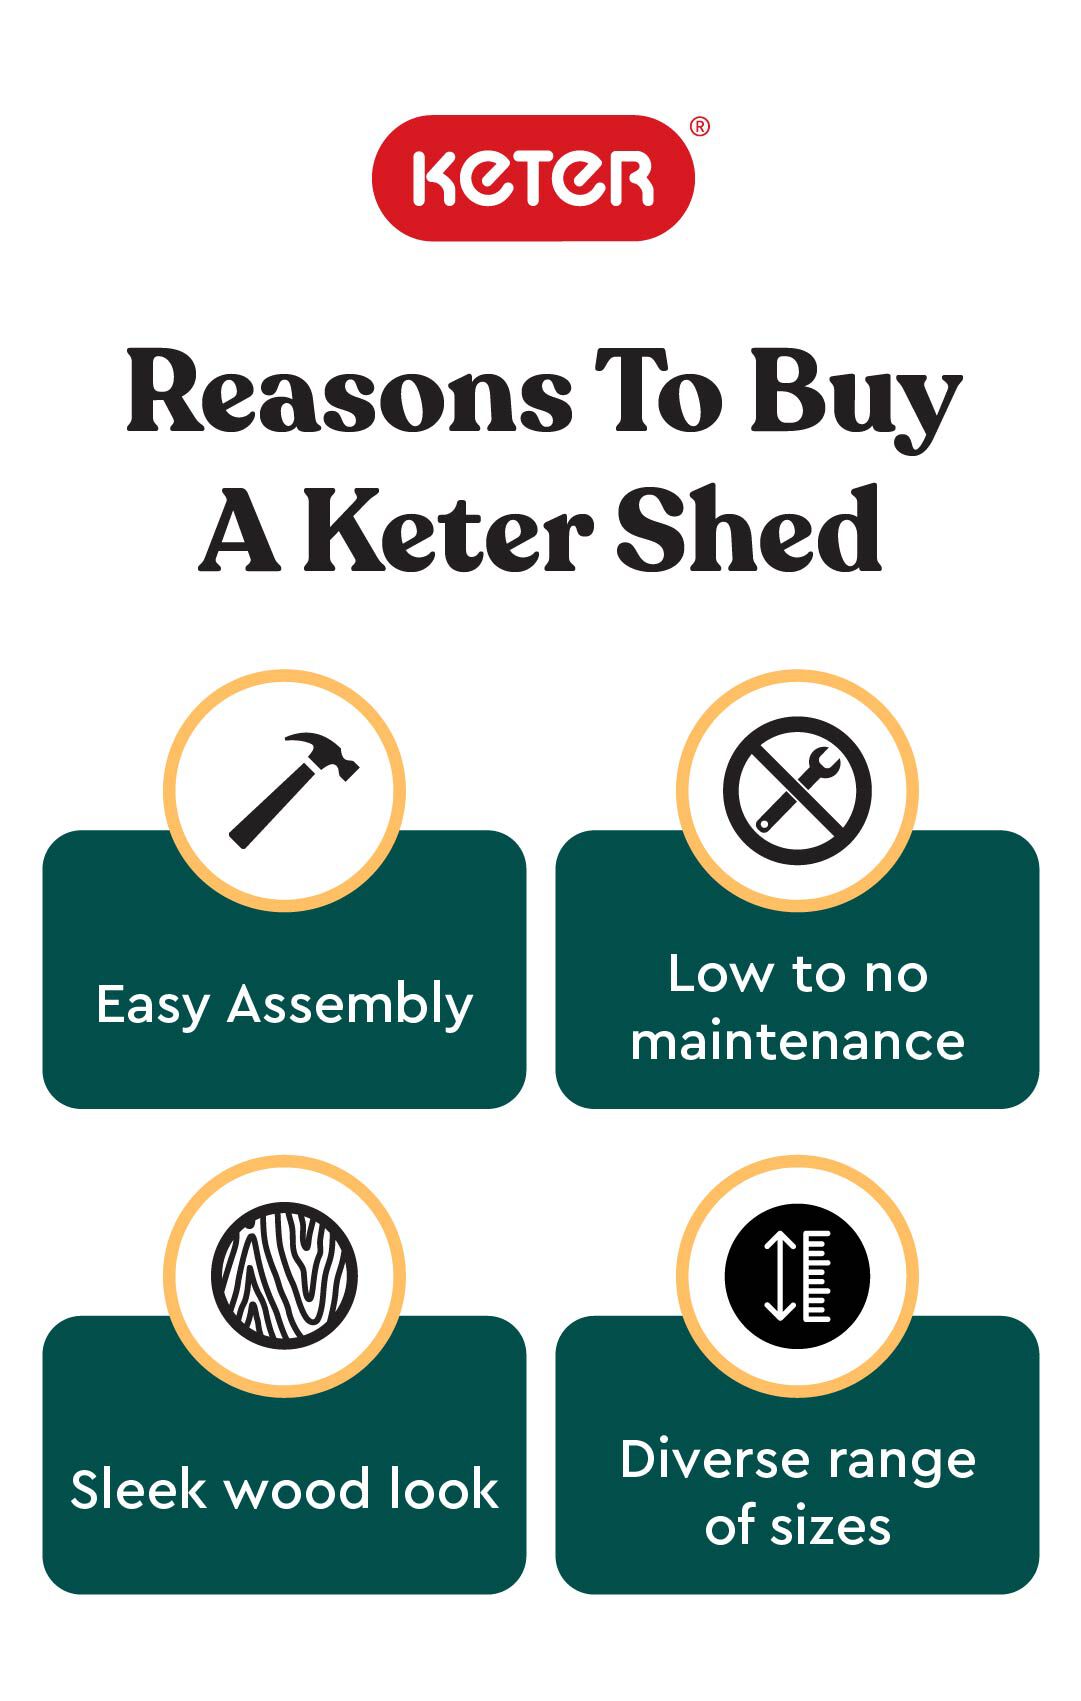 Reasons to buy a Keter Shed infographic 